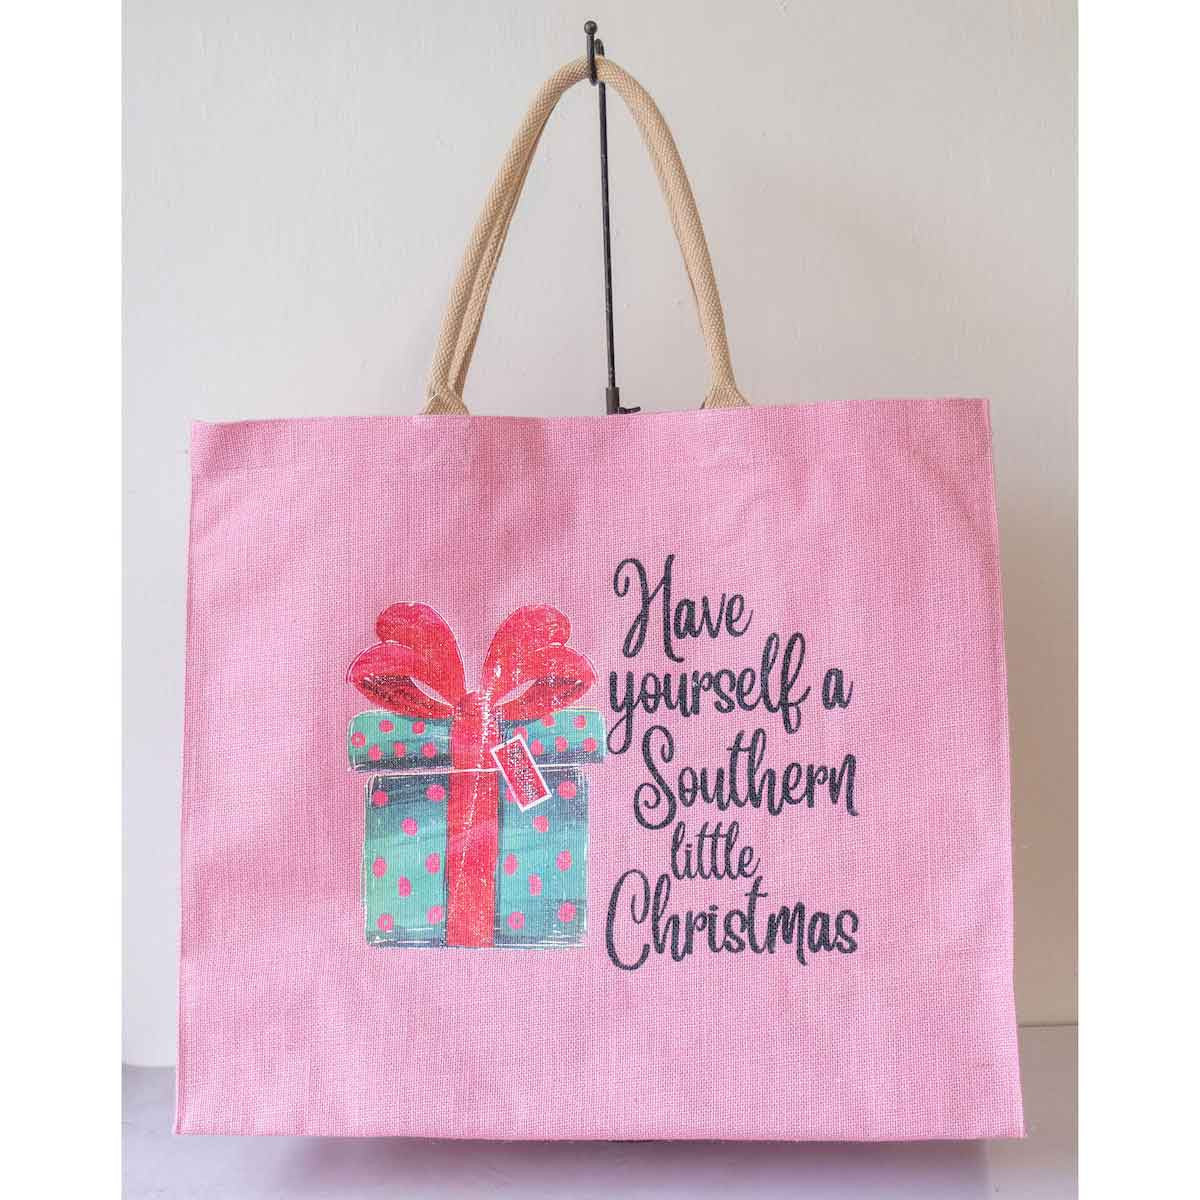 Southern Little Christmas Carryall Tote